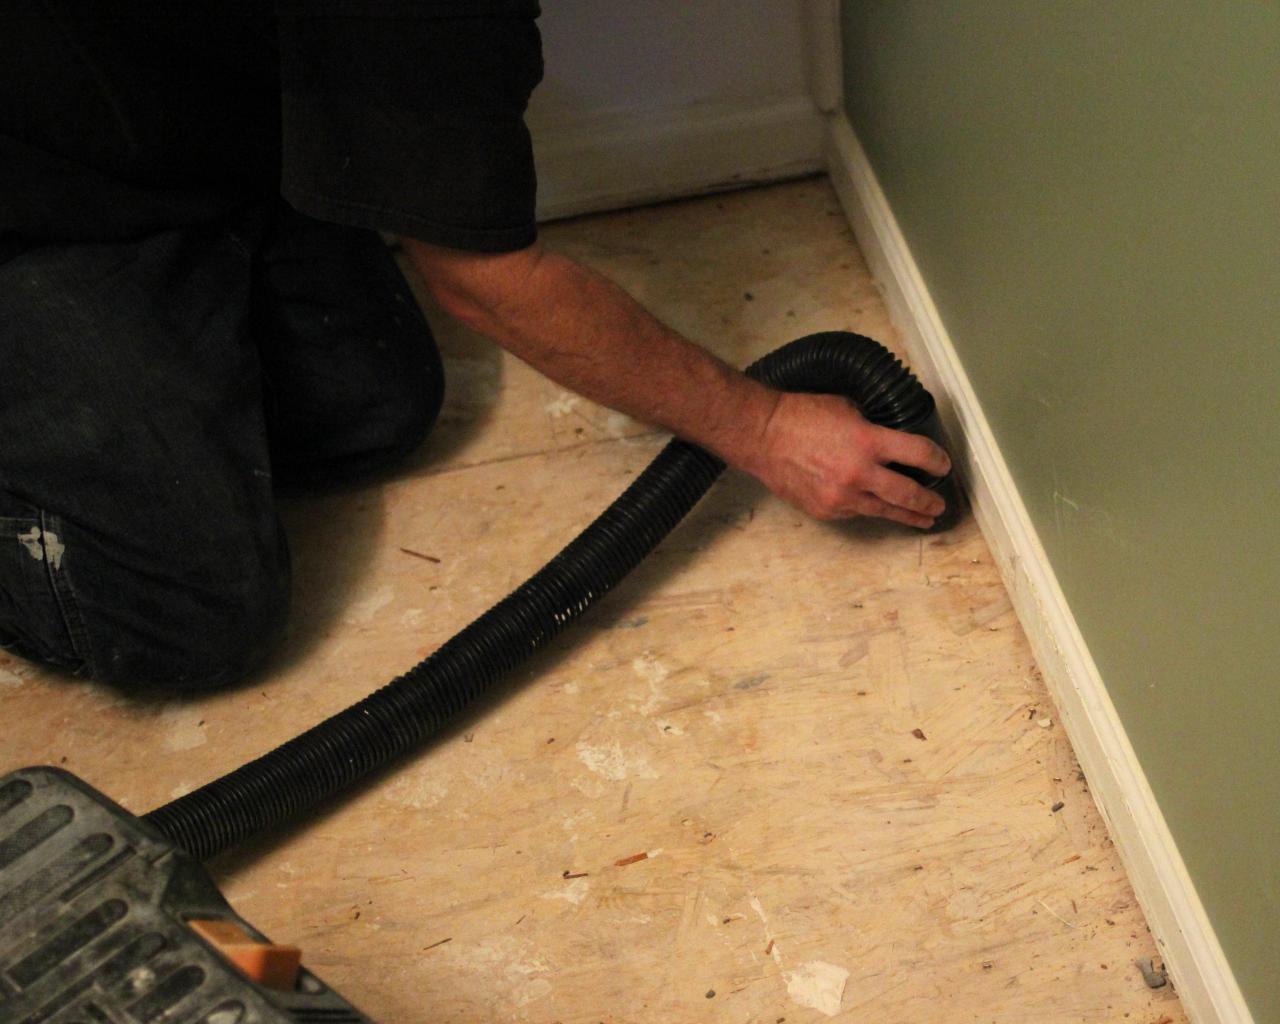 How To Remove A Tile Floor, Removing Bathroom Floor Tile